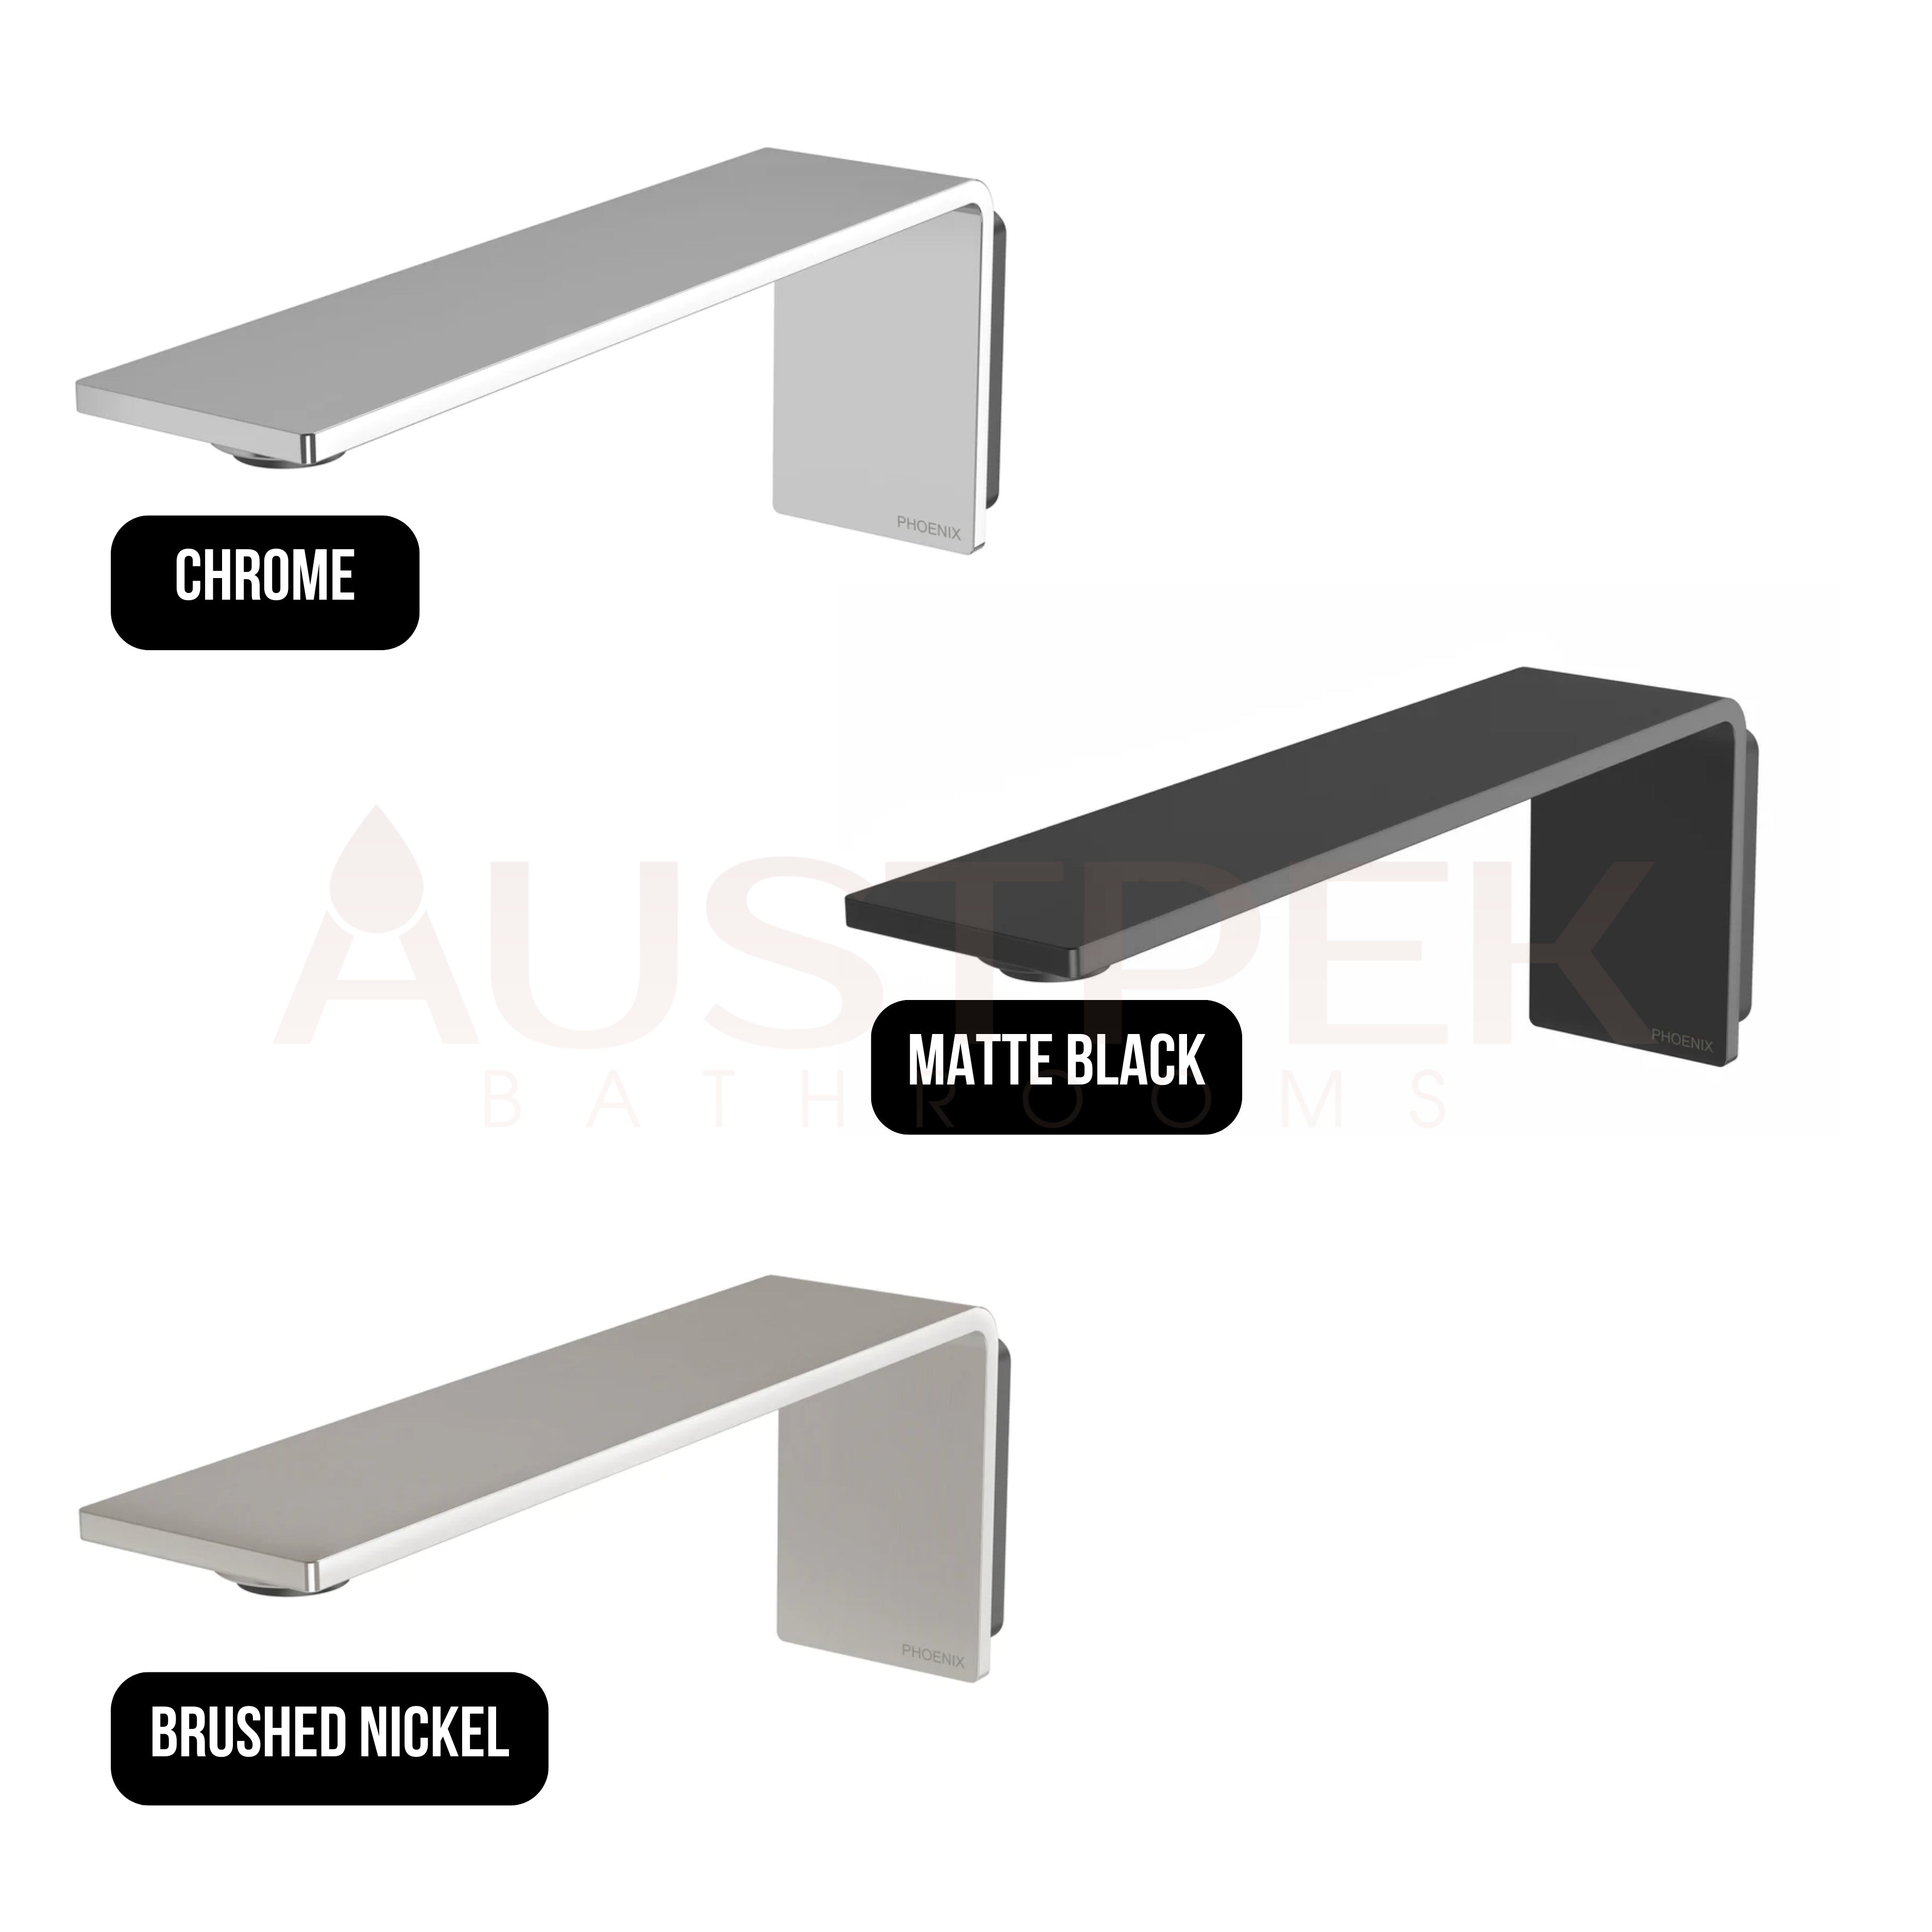 PHOENIX AXIA WALL BASIN / BATH OUTLET 200MM BRUSHED NICKEL